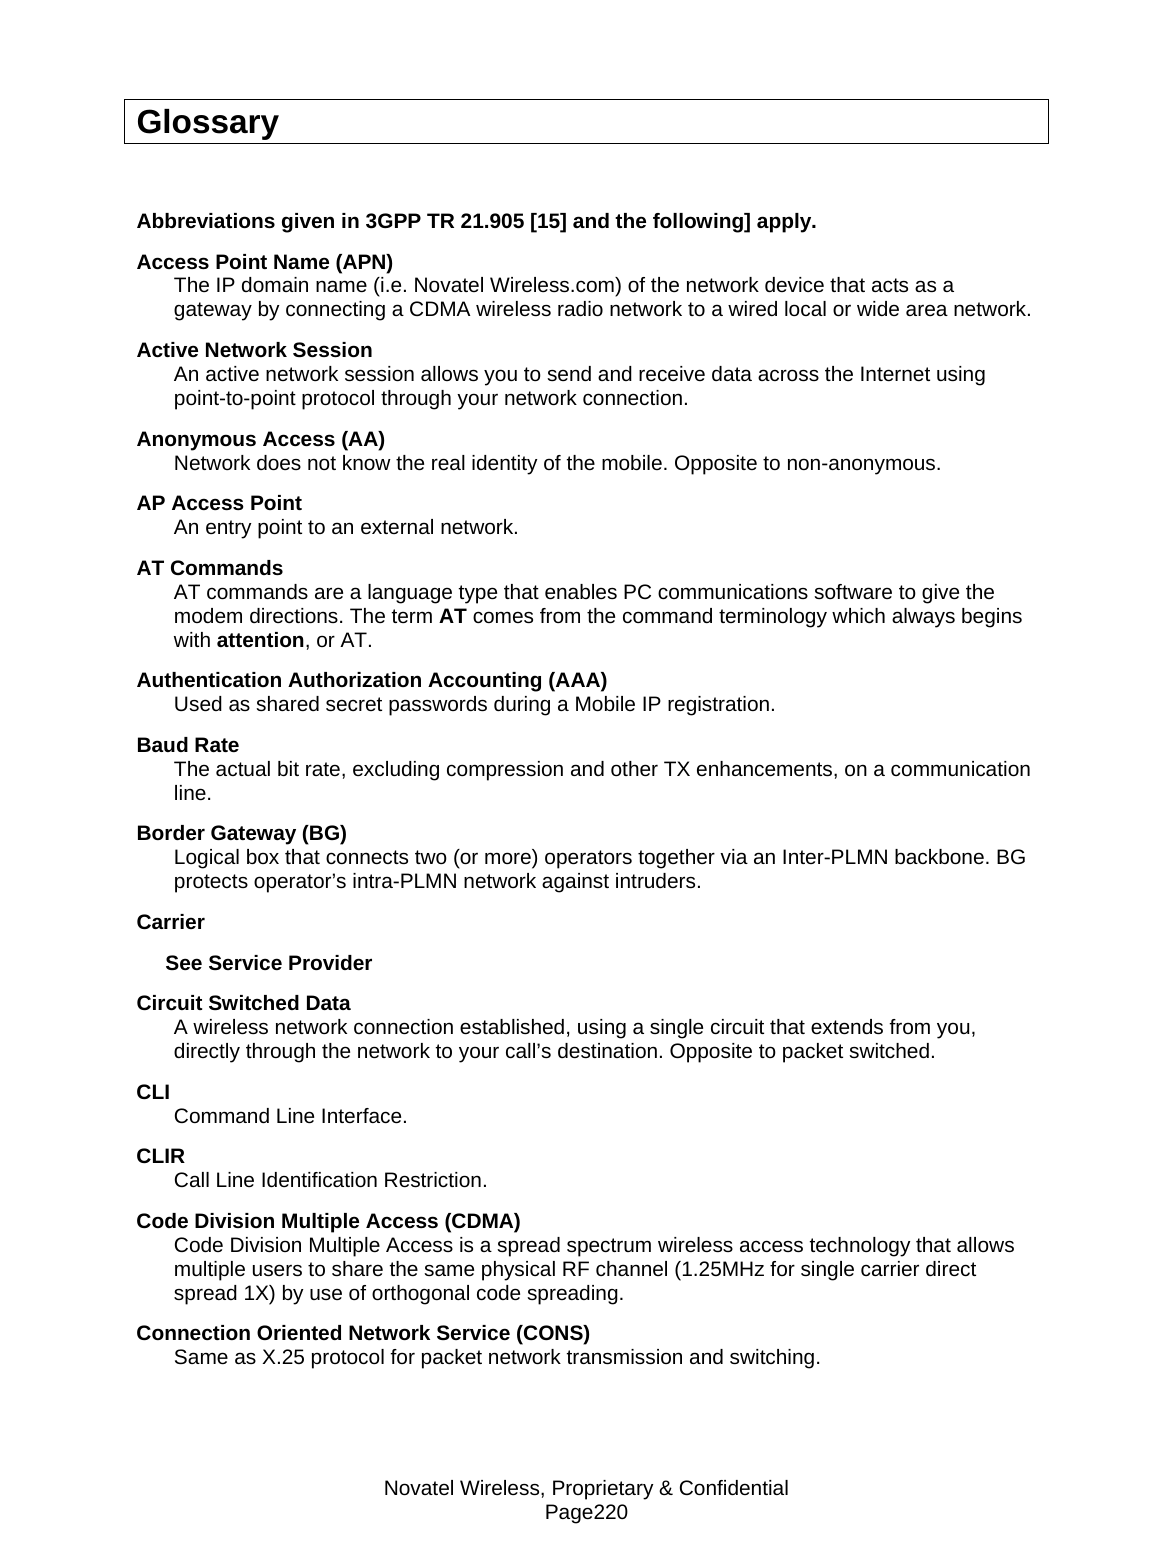 Novatel Wireless, Proprietary &amp; Confidential Page220 Glossary  Abbreviations given in 3GPP TR 21.905 [15] and the following] apply. Access Point Name (APN) The IP domain name (i.e. Novatel Wireless.com) of the network device that acts as a gateway by connecting a CDMA wireless radio network to a wired local or wide area network. Active Network Session An active network session allows you to send and receive data across the Internet using point-to-point protocol through your network connection. Anonymous Access (AA) Network does not know the real identity of the mobile. Opposite to non-anonymous. AP Access Point An entry point to an external network. AT Commands AT commands are a language type that enables PC communications software to give the modem directions. The term AT comes from the command terminology which always begins with attention, or AT. Authentication Authorization Accounting (AAA) Used as shared secret passwords during a Mobile IP registration. Baud Rate The actual bit rate, excluding compression and other TX enhancements, on a communication line. Border Gateway (BG) Logical box that connects two (or more) operators together via an Inter-PLMN backbone. BG protects operator’s intra-PLMN network against intruders. Carrier      See Service Provider Circuit Switched Data A wireless network connection established, using a single circuit that extends from you, directly through the network to your call’s destination. Opposite to packet switched. CLI Command Line Interface. CLIR  Call Line Identification Restriction. Code Division Multiple Access (CDMA) Code Division Multiple Access is a spread spectrum wireless access technology that allows multiple users to share the same physical RF channel (1.25MHz for single carrier direct spread 1X) by use of orthogonal code spreading. Connection Oriented Network Service (CONS) Same as X.25 protocol for packet network transmission and switching. 